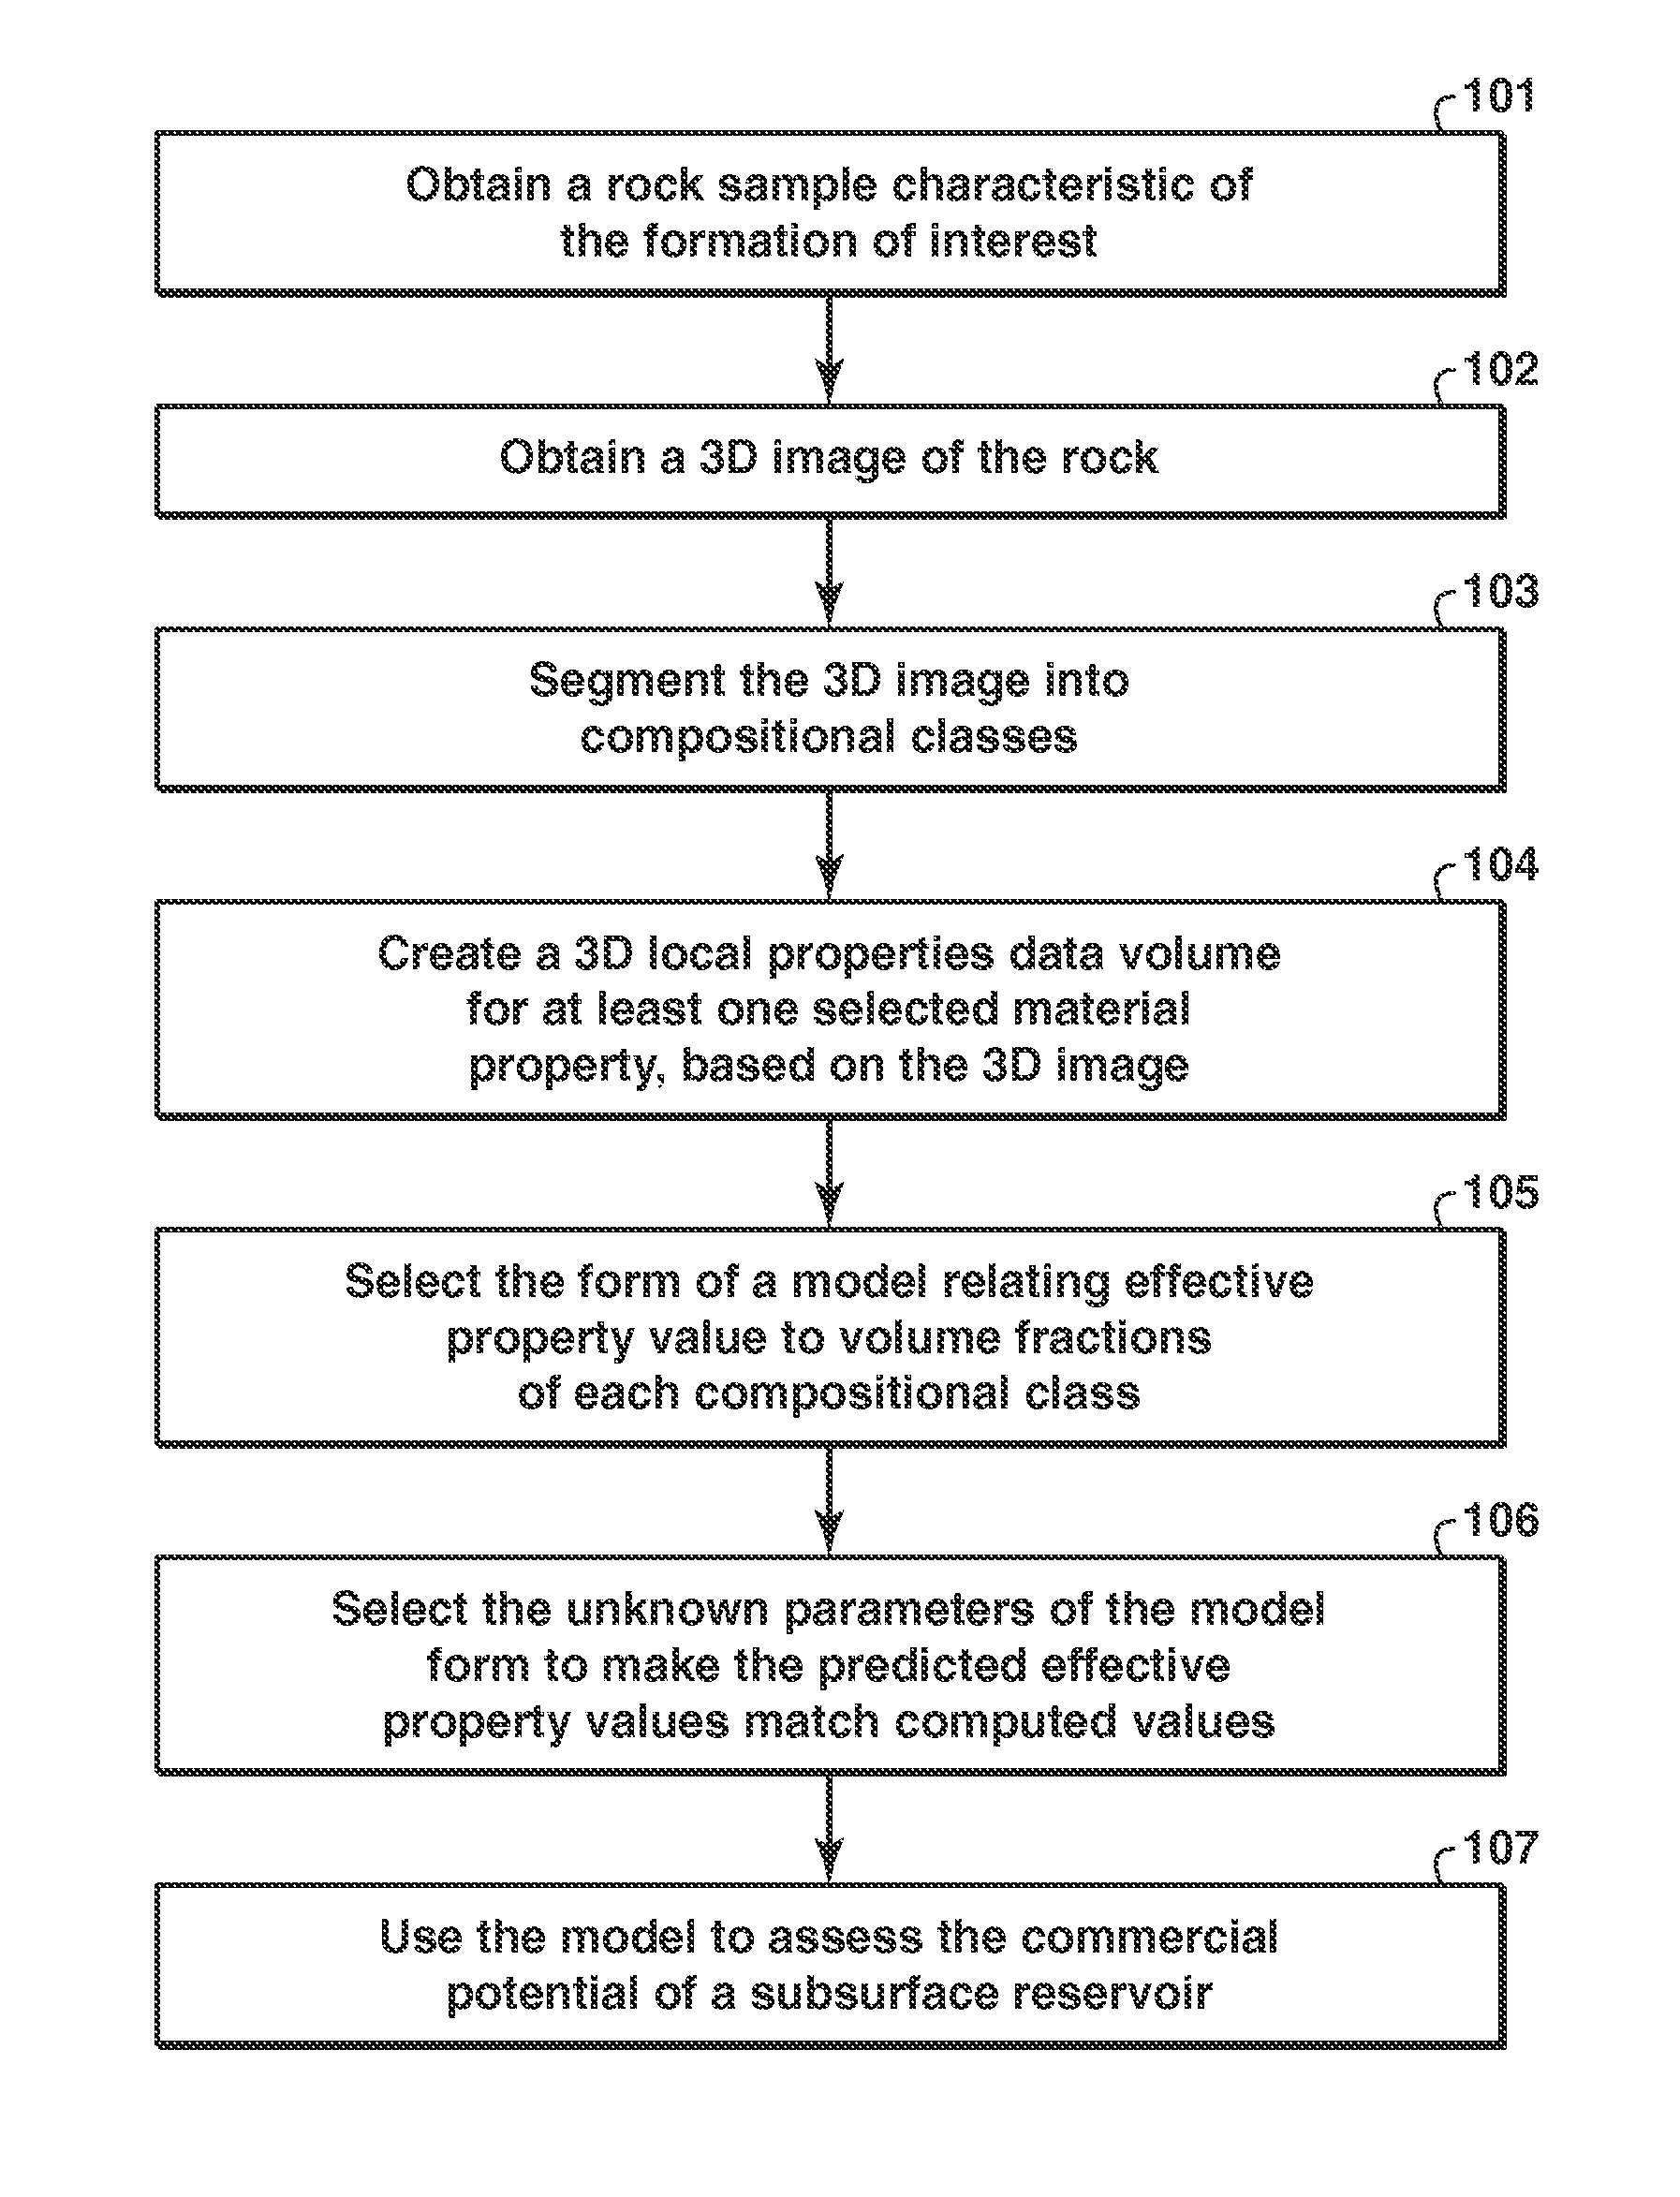 Method for determining the properties of hydrocarbon reservoirs from geophysical data